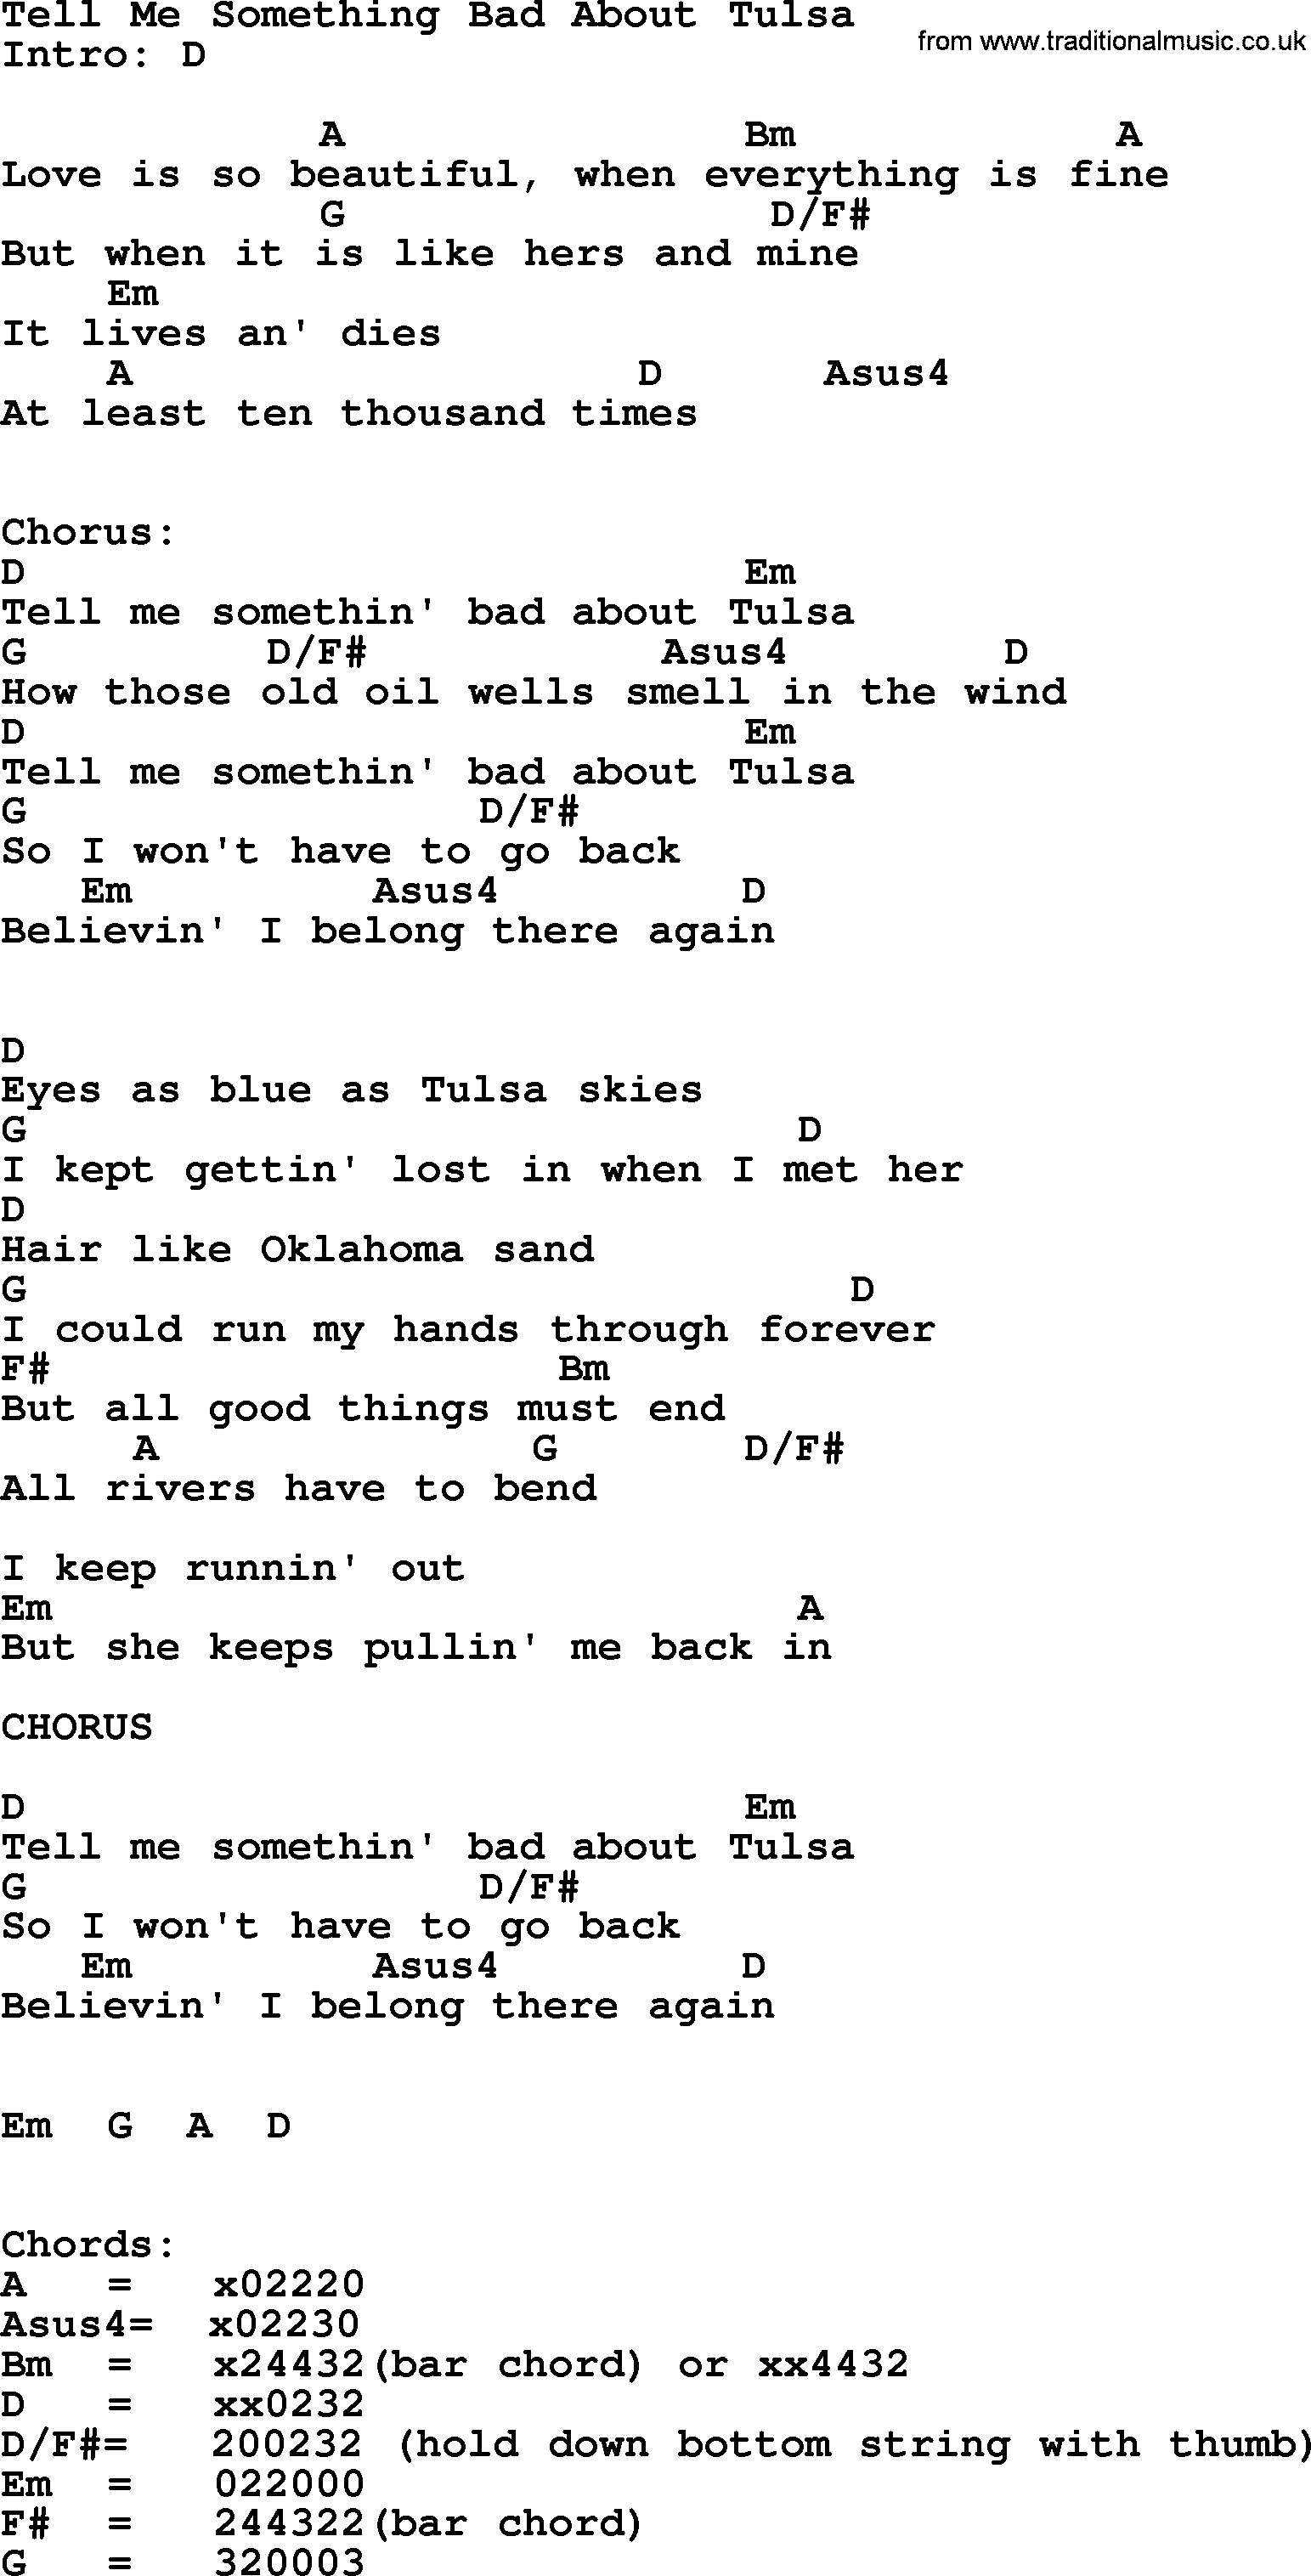 George Strait song: Tell Me Something Bad About Tulsa, lyrics and chords